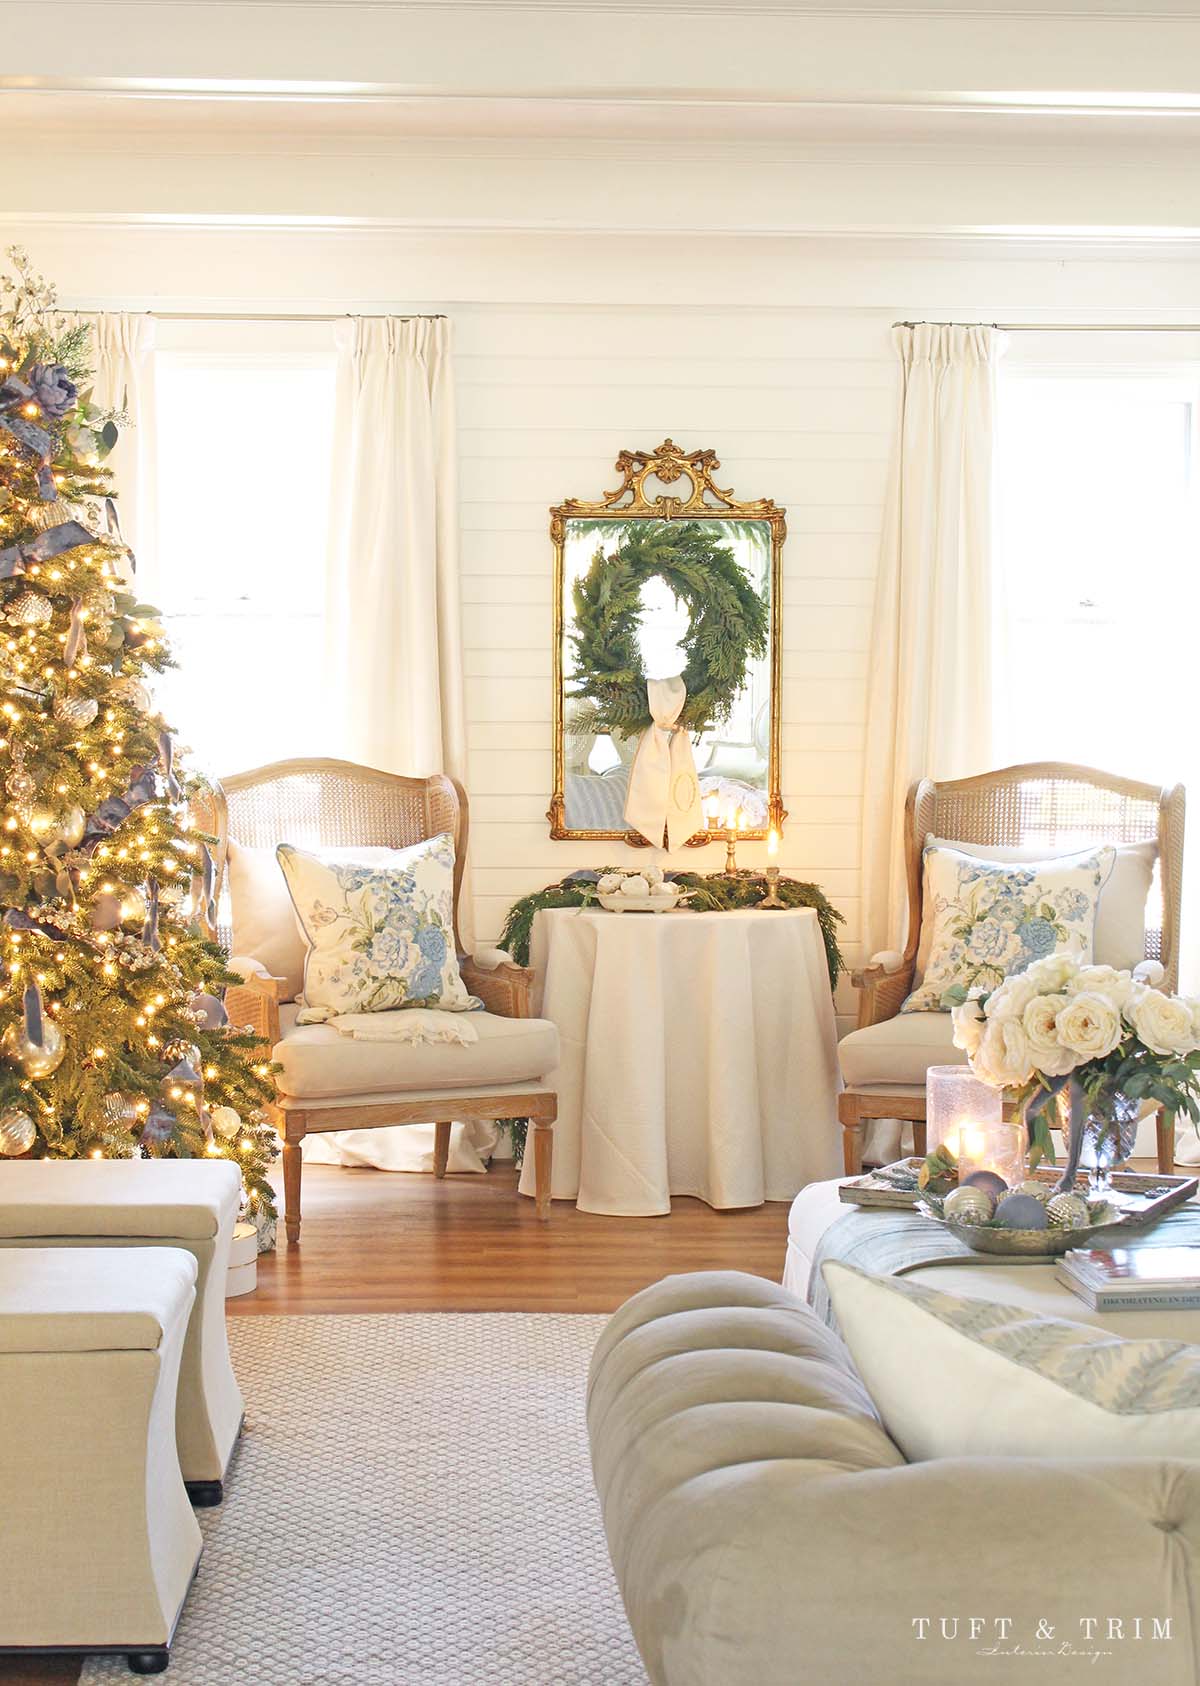 French Blue & Winter Green Christmas Living Room with Tuft & Trim Interior Design